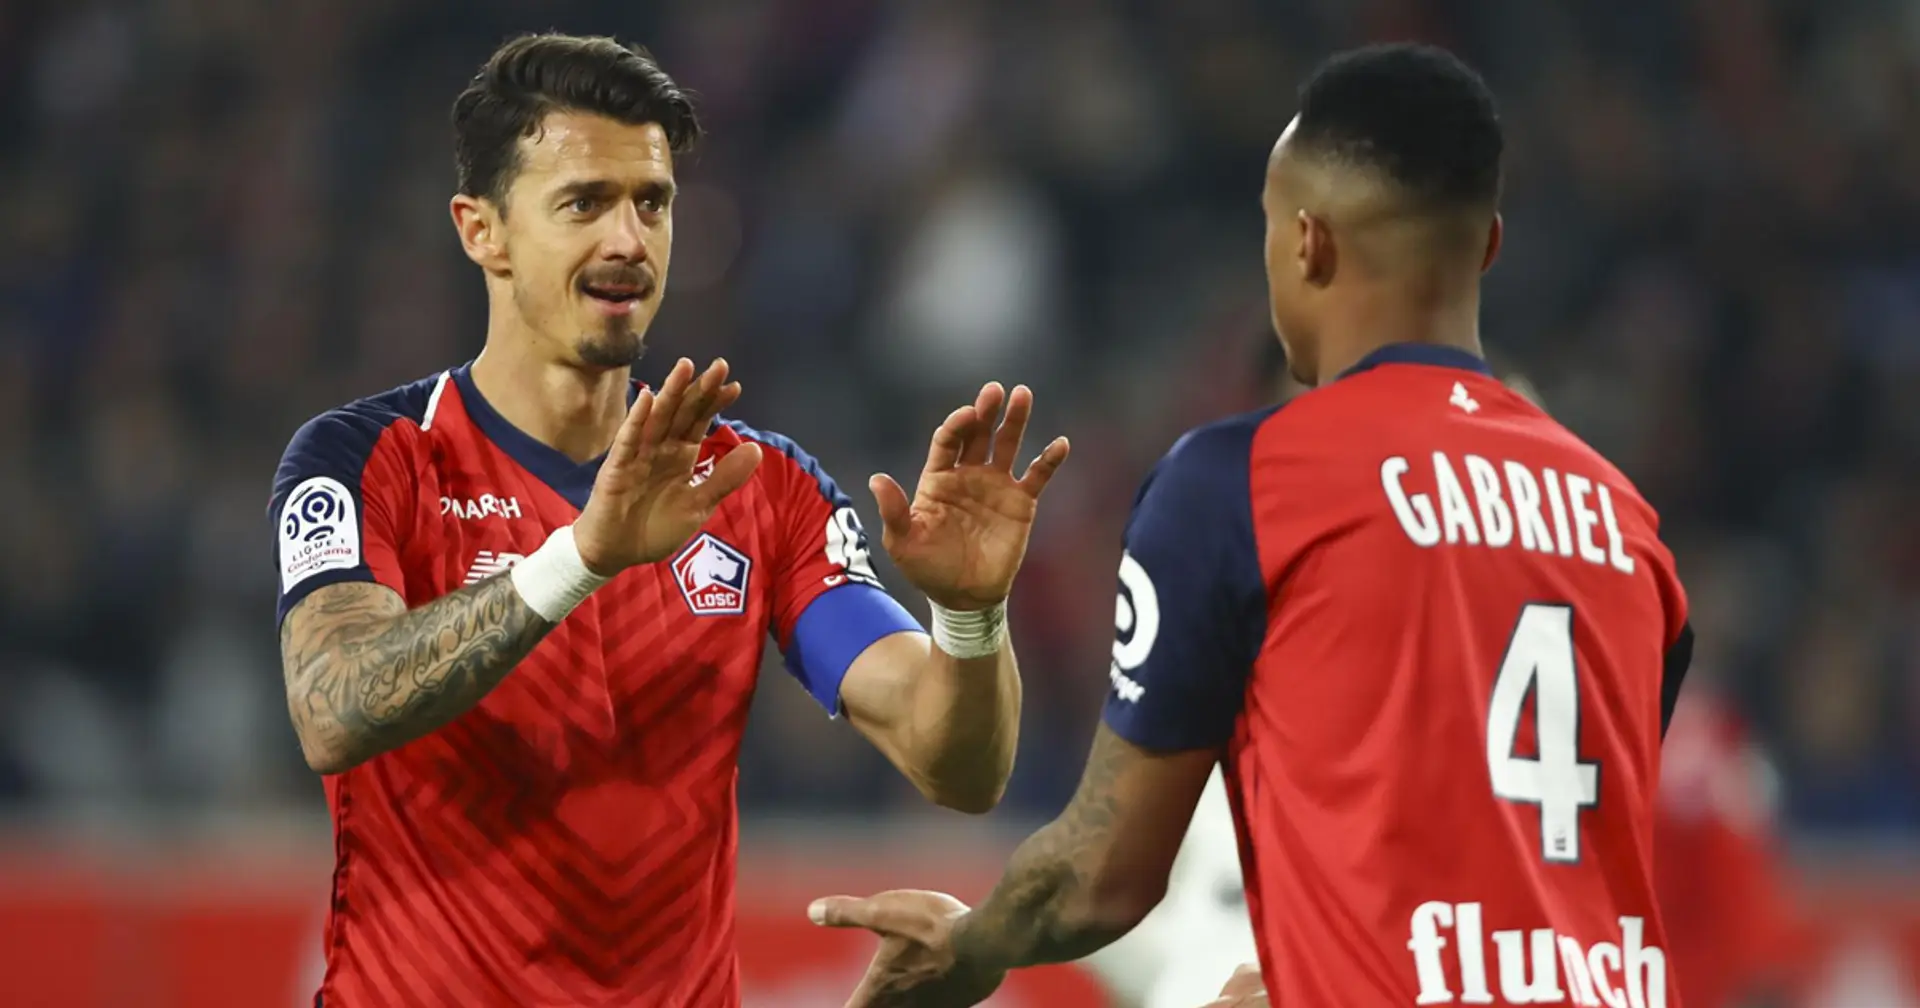 'It's every player's dream to play in the Premier League': Gabriel's Lille teammate Fonte confirms talks with PL clubs